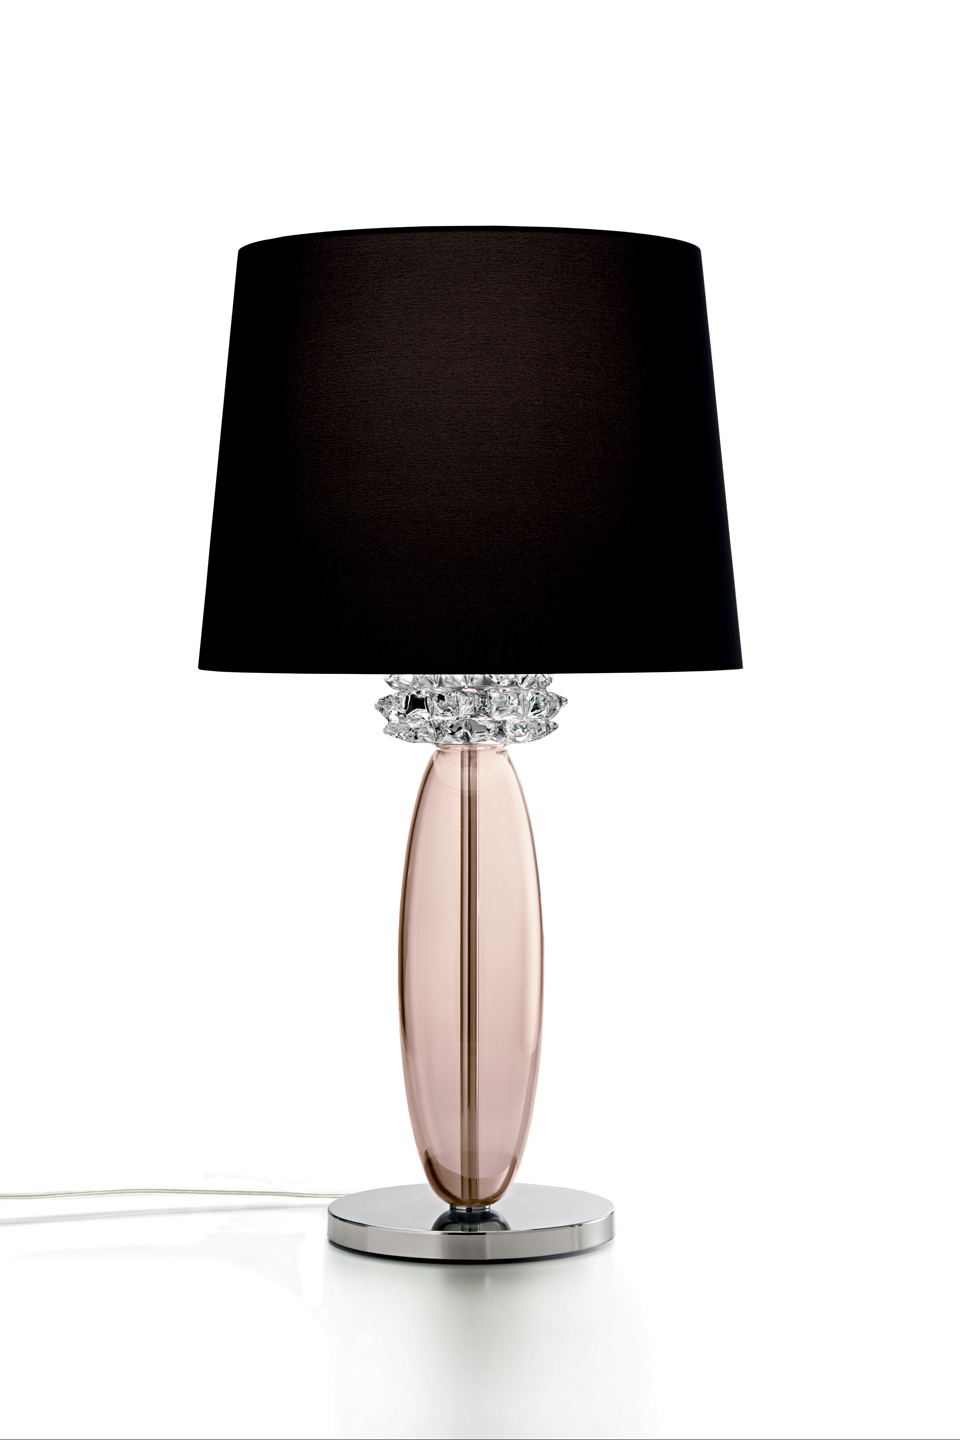 Rotterdam Table Lamp In Polished Chrome, Chrome Glass Table Lamp With Pink Shade